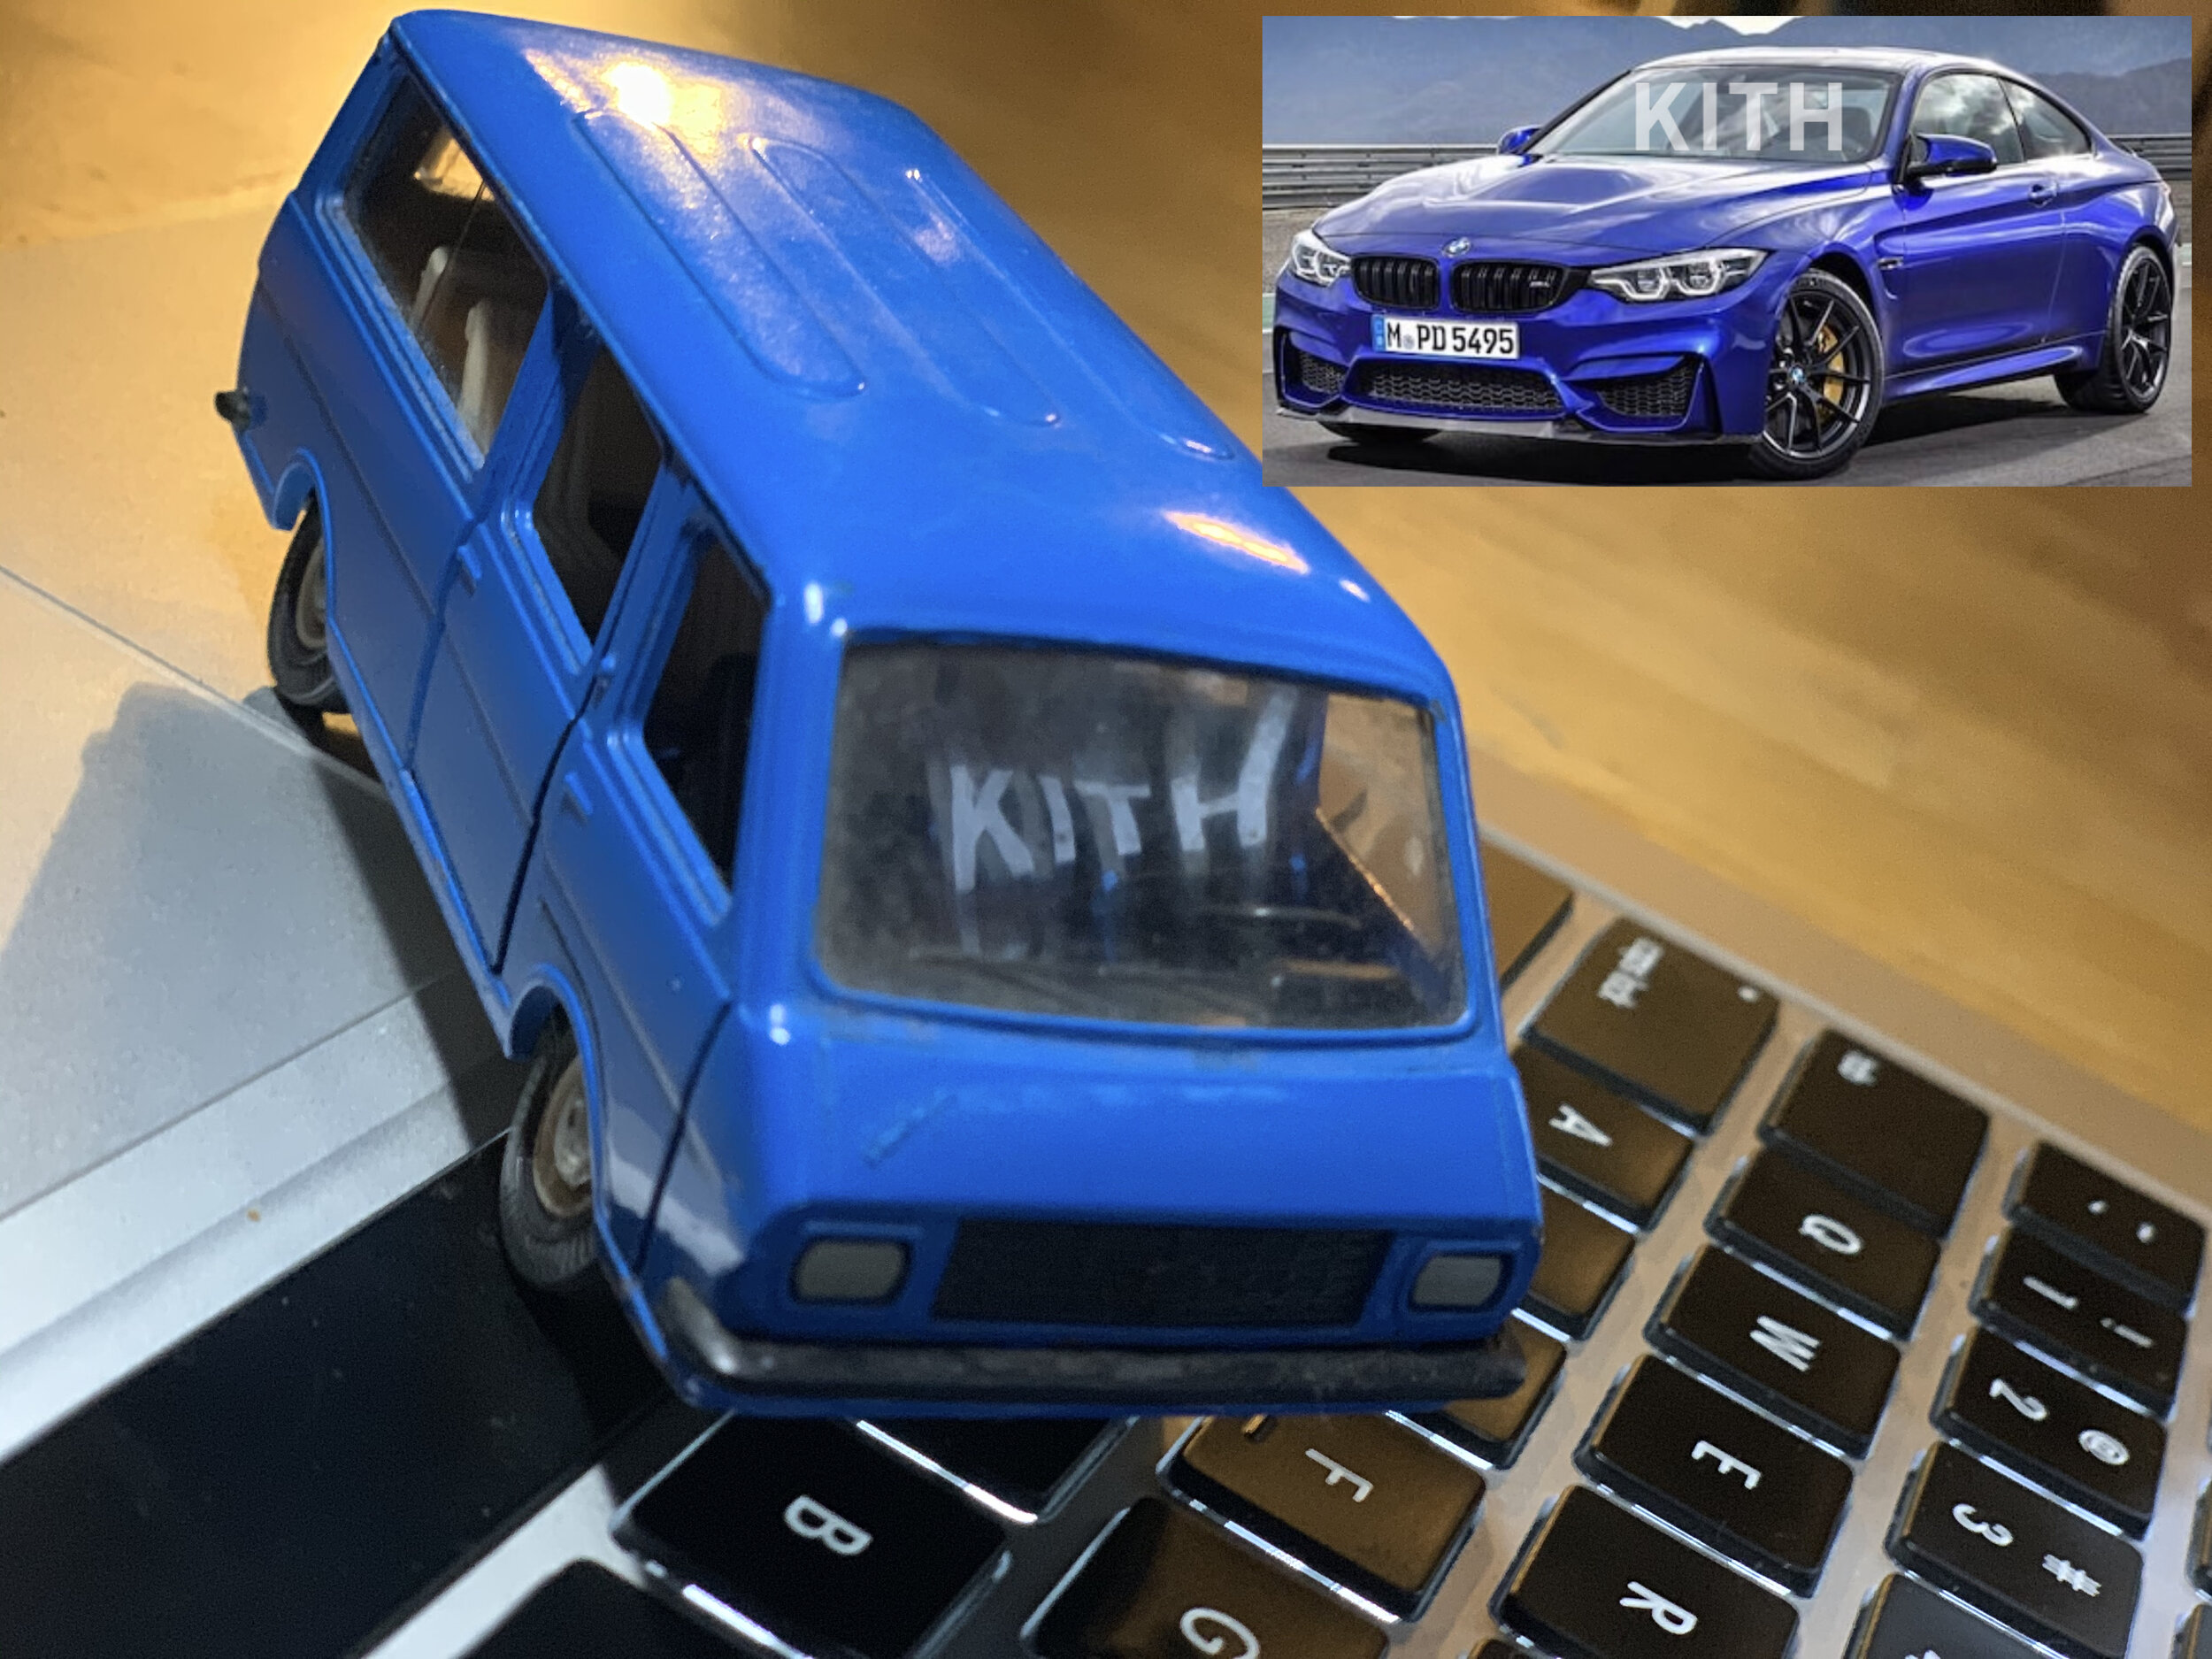  Original design sketch and proof of concept.   The initial intent was to create a backwards KITH logo out of LED Neon and suspend it above the car so that you would see the KITH logo in photos of the BMW. Due to time and budget constraints we ended 